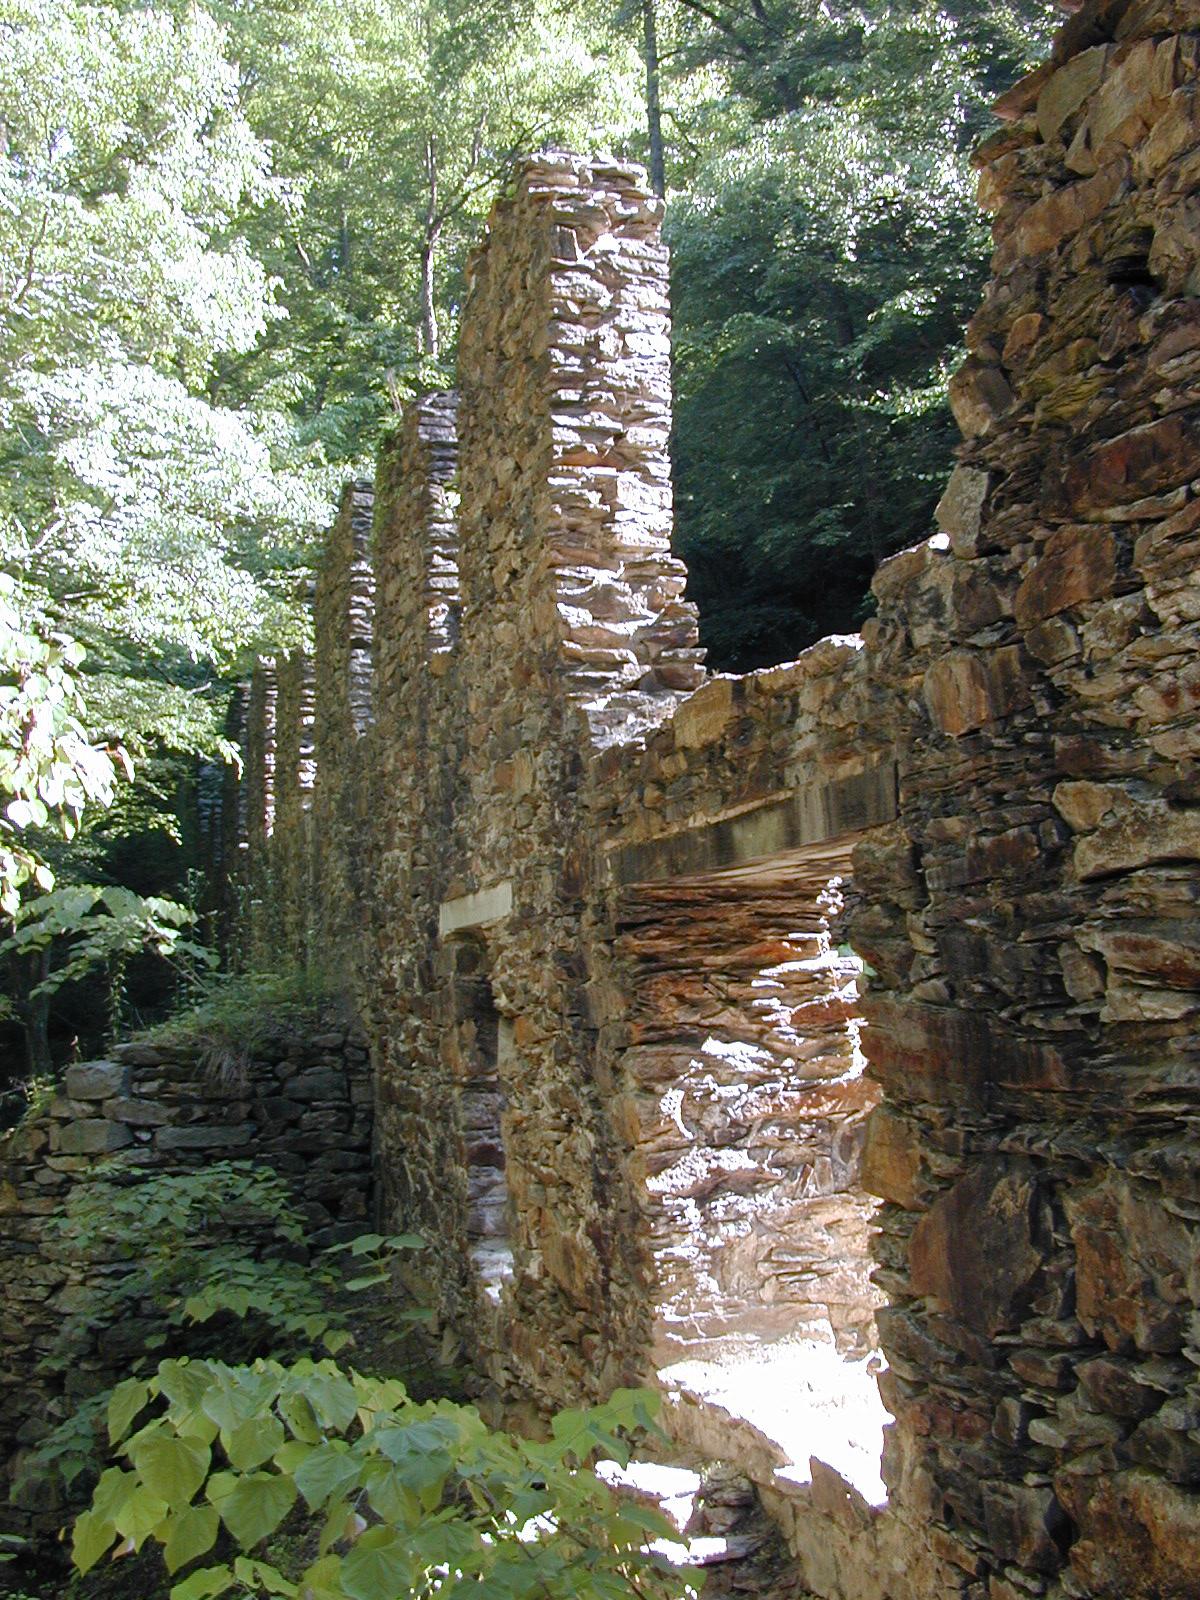 Stone ruins of the Marietta Paper Mill surrounded by lush green vegatation.